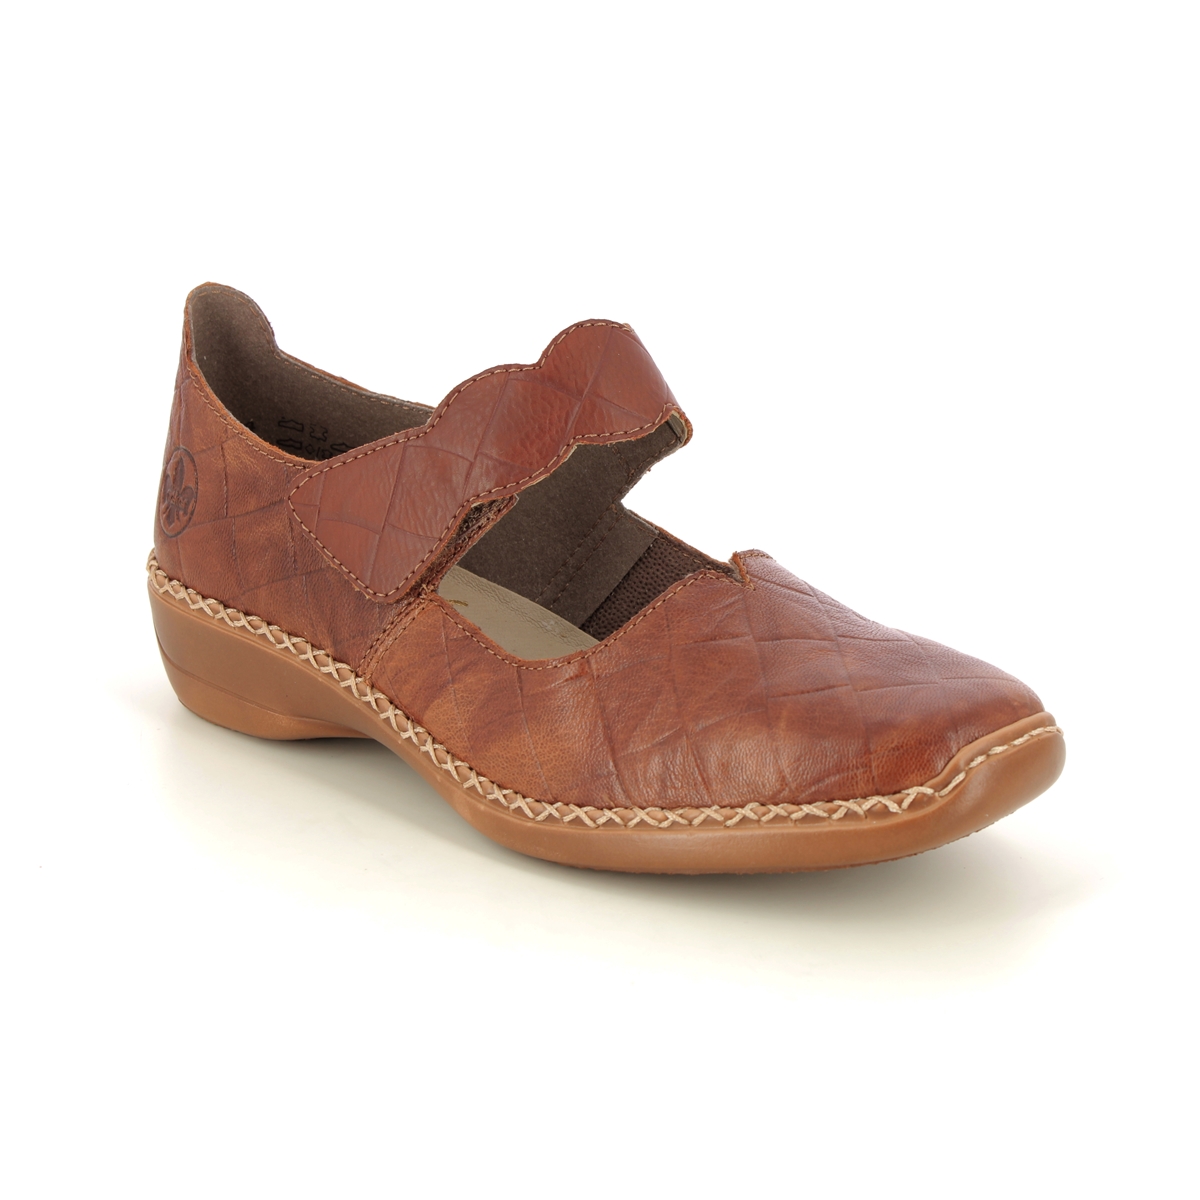 Rieker Dorisbar Tan Leather Womens Mary Jane Shoes 41398-22 In Size 40 In Plain Tan Leather